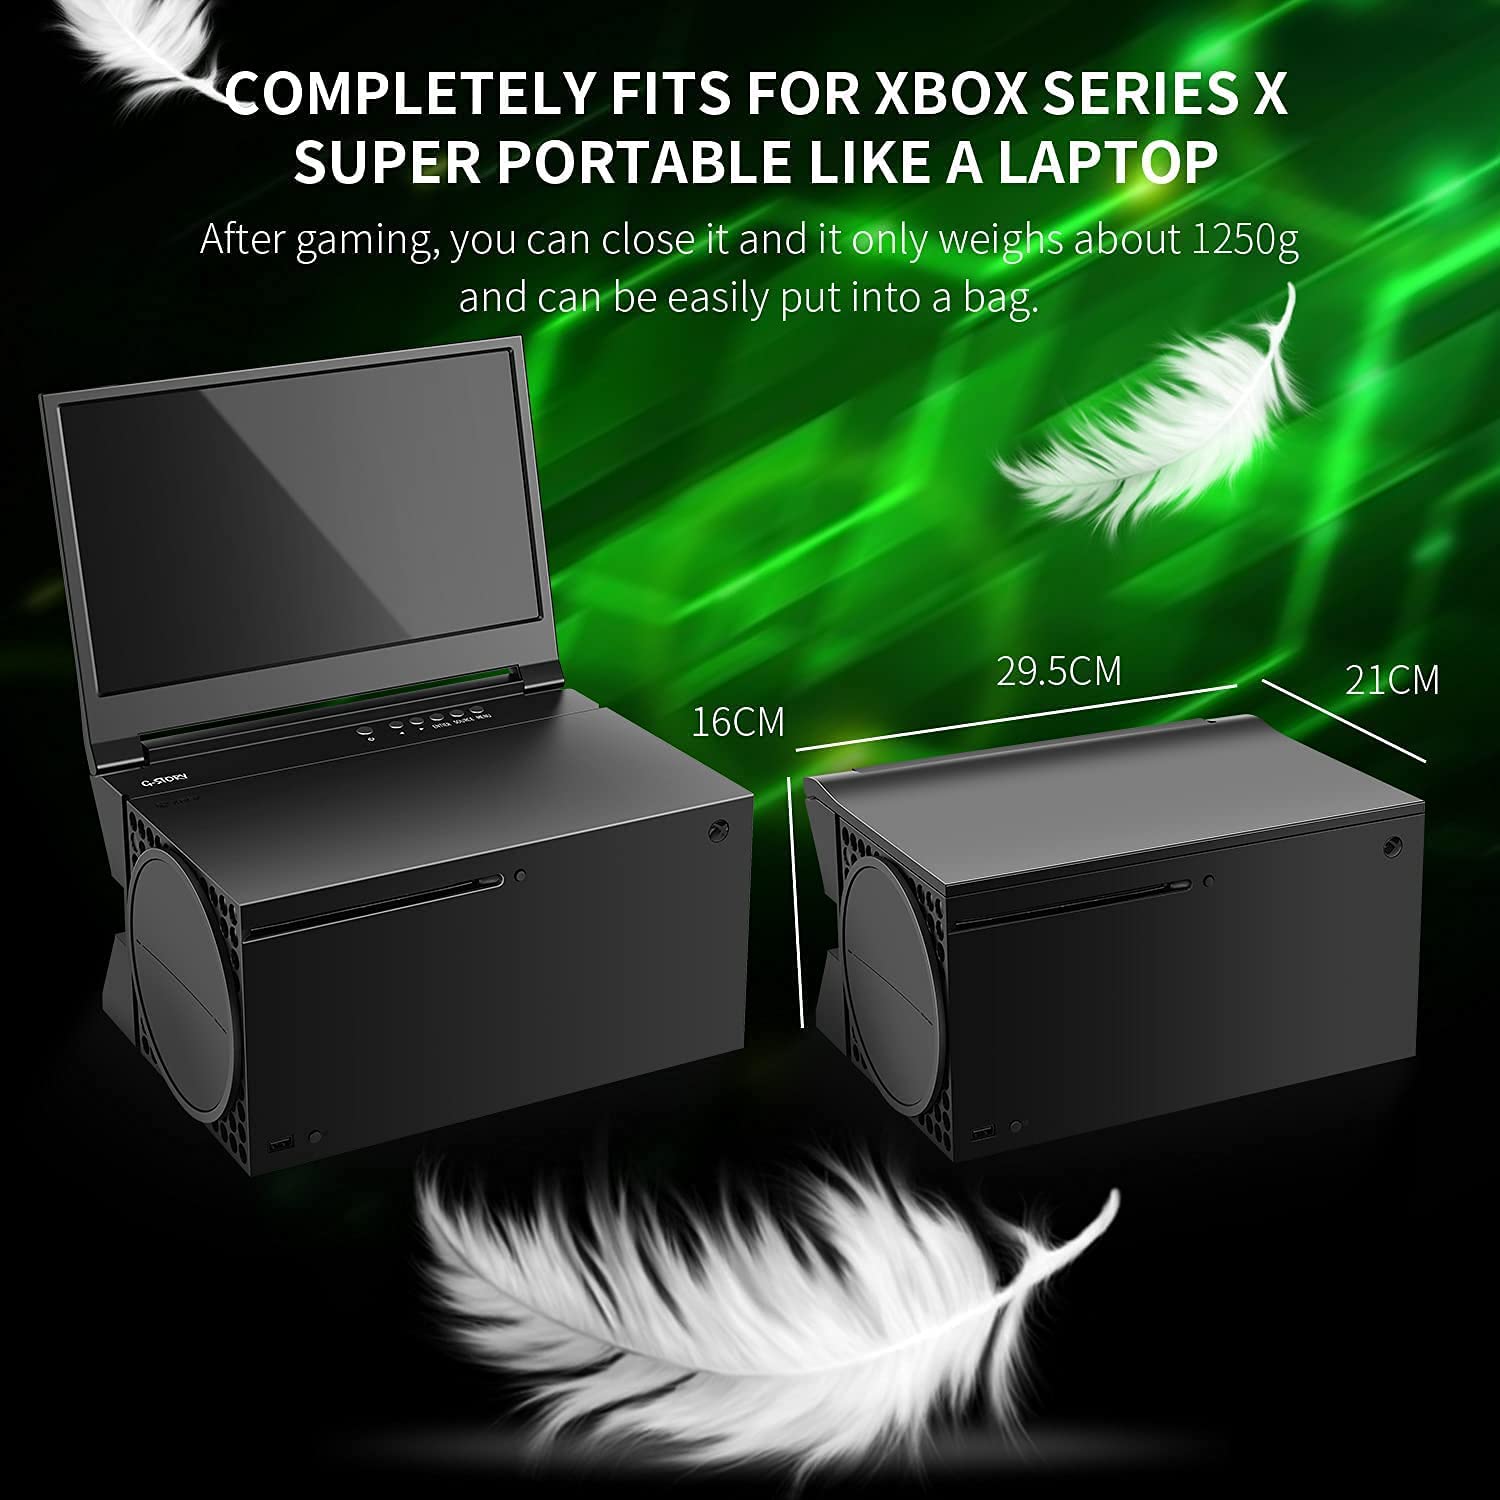 G-STORY 12.5'' Portable Monitor, 1080P Gaming Monitor IPS Screen for Xbox  Series S（not Included） with Two HDMI, HDR, Freesync, Game Mode, Travel